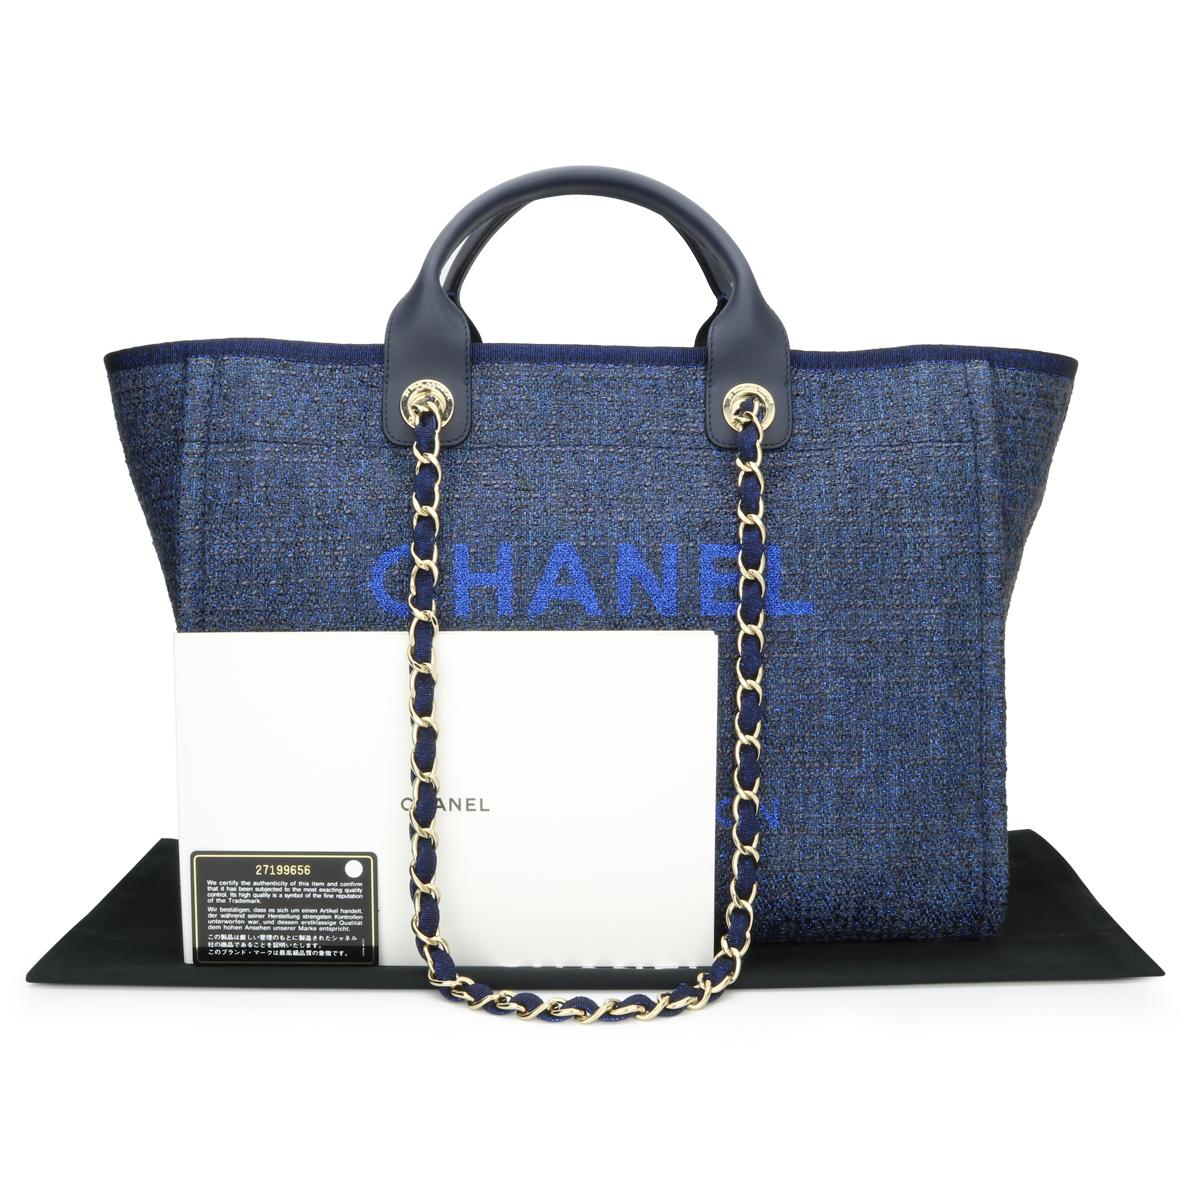 CHANEL Deauville Tote Large Navy Canvas with Light Gold Hardware 2018.

This bag is in a pristine condition. A stunning lightweight bag which can be used both as a daily bag or holiday bag.

Exterior Condition: Pristine condition, corners show no